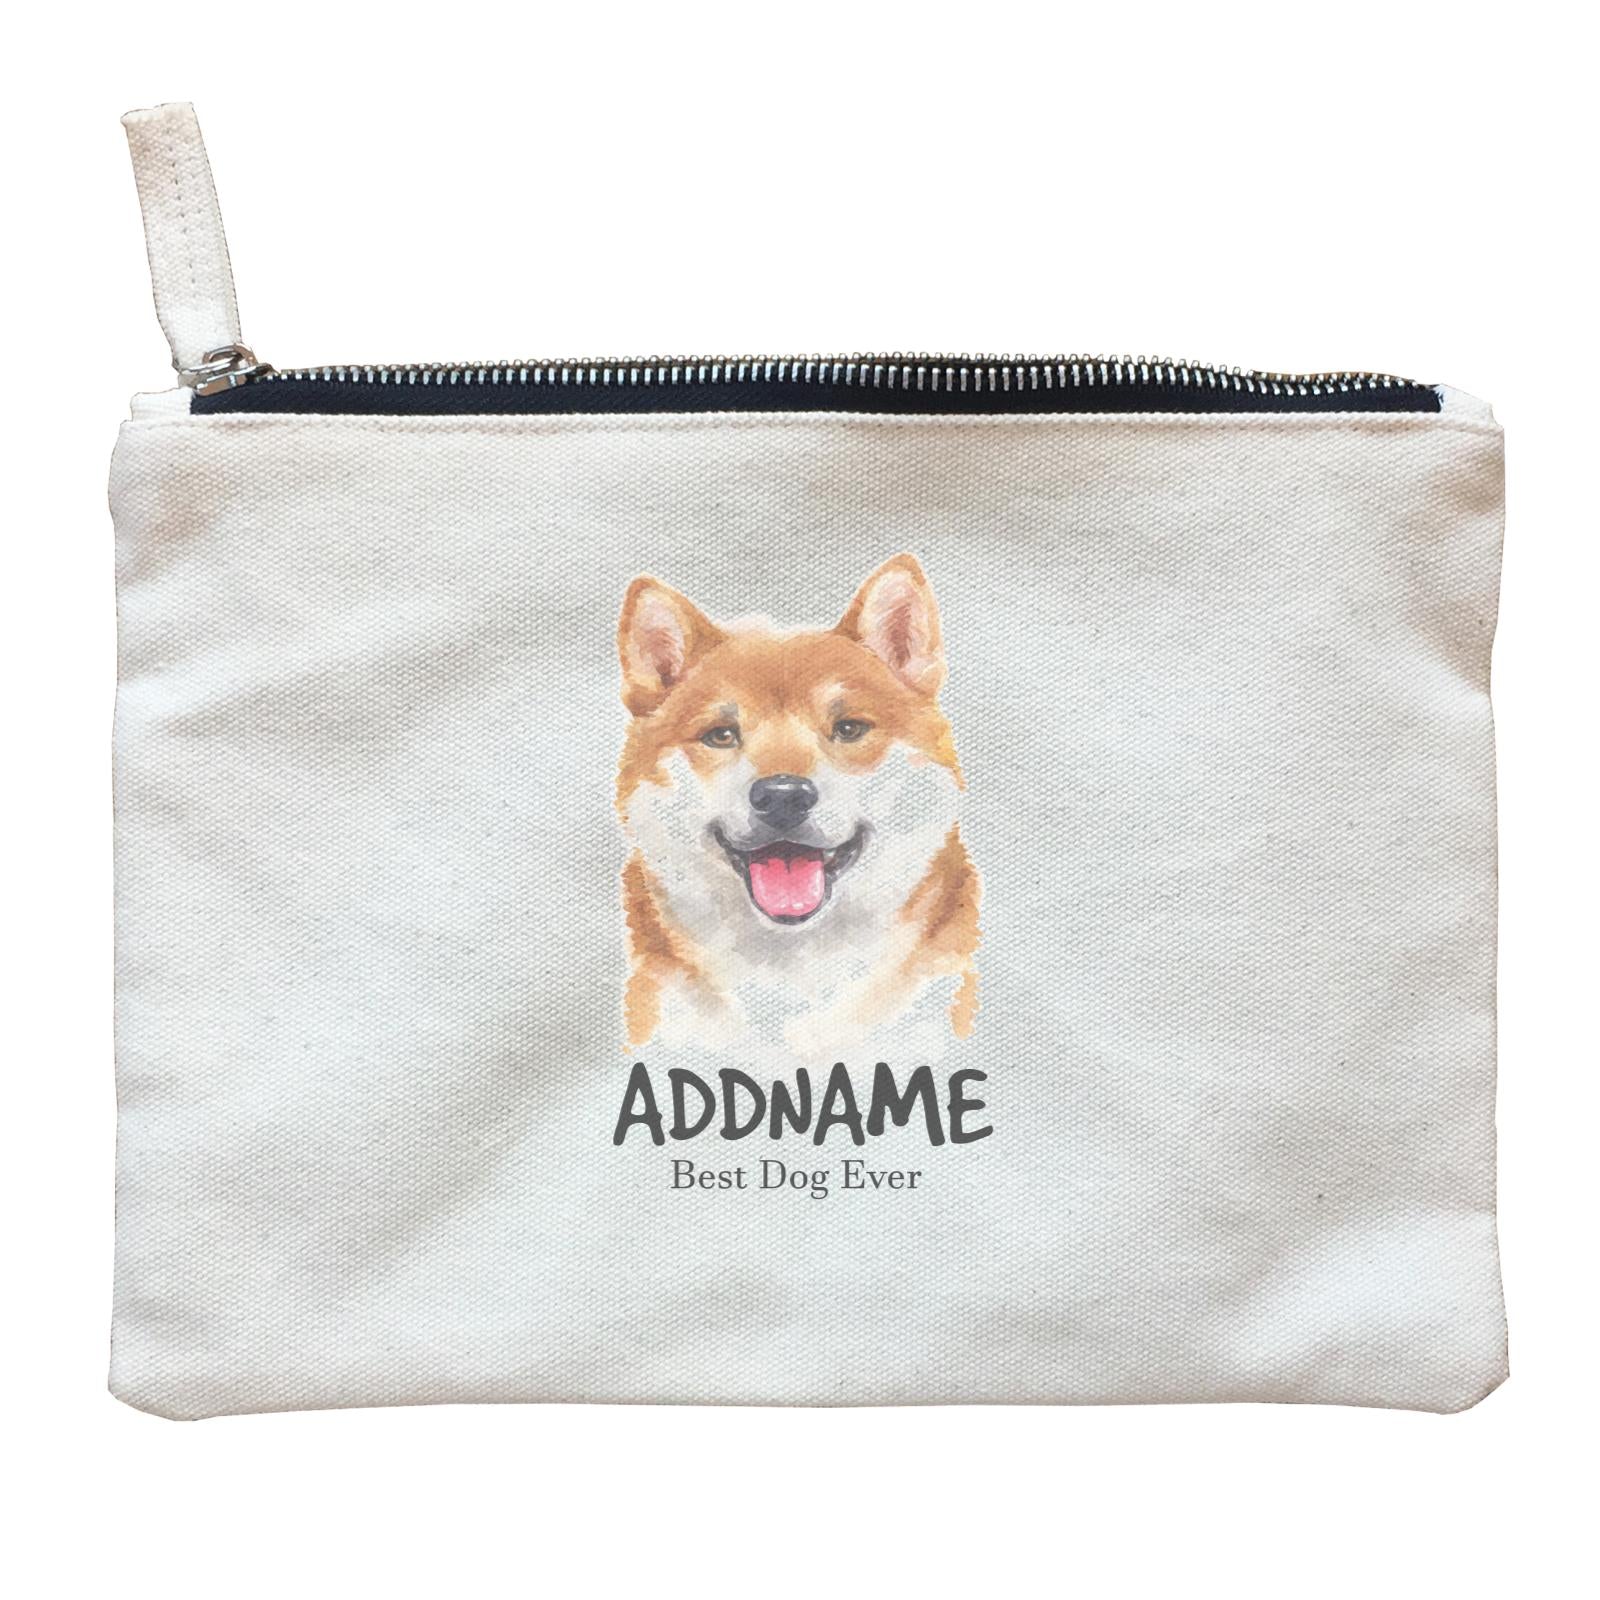 Watercolor Dog Shiba Inu Best Dog Ever Addname Zipper Pouch